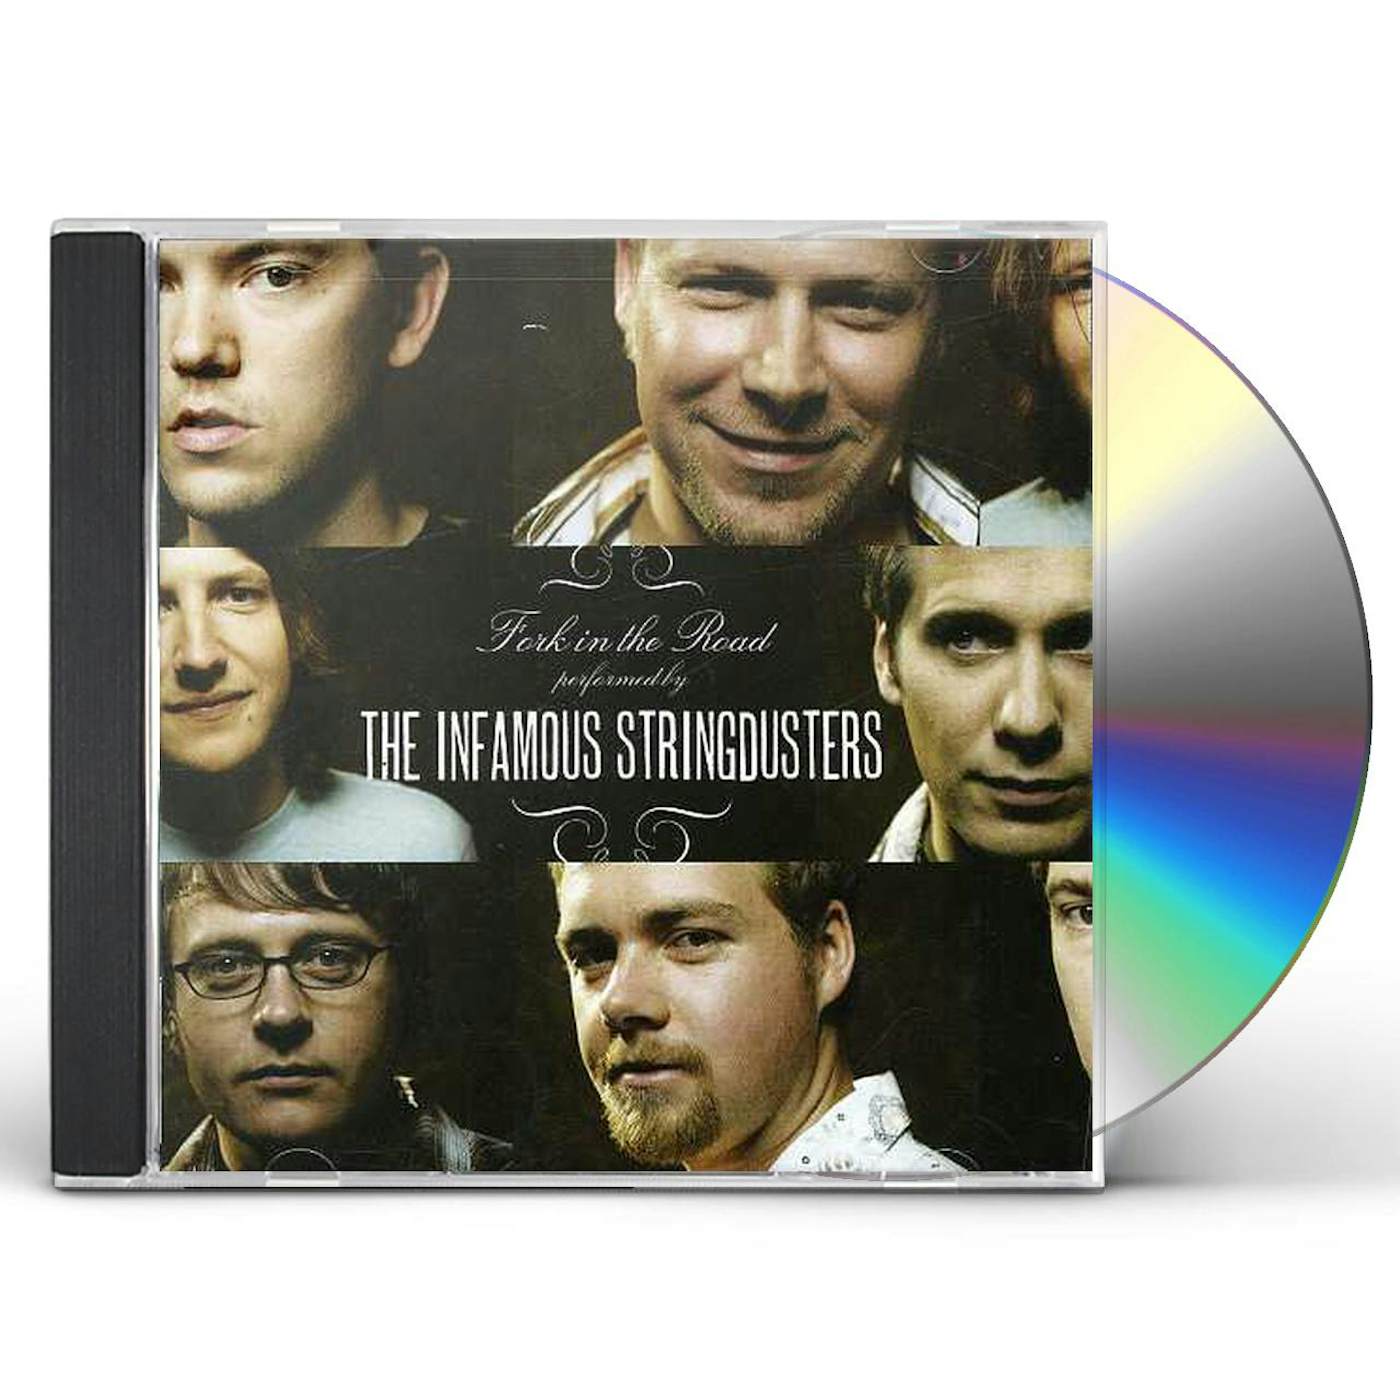 The Infamous Stringdusters FORK IN THE ROAD CD